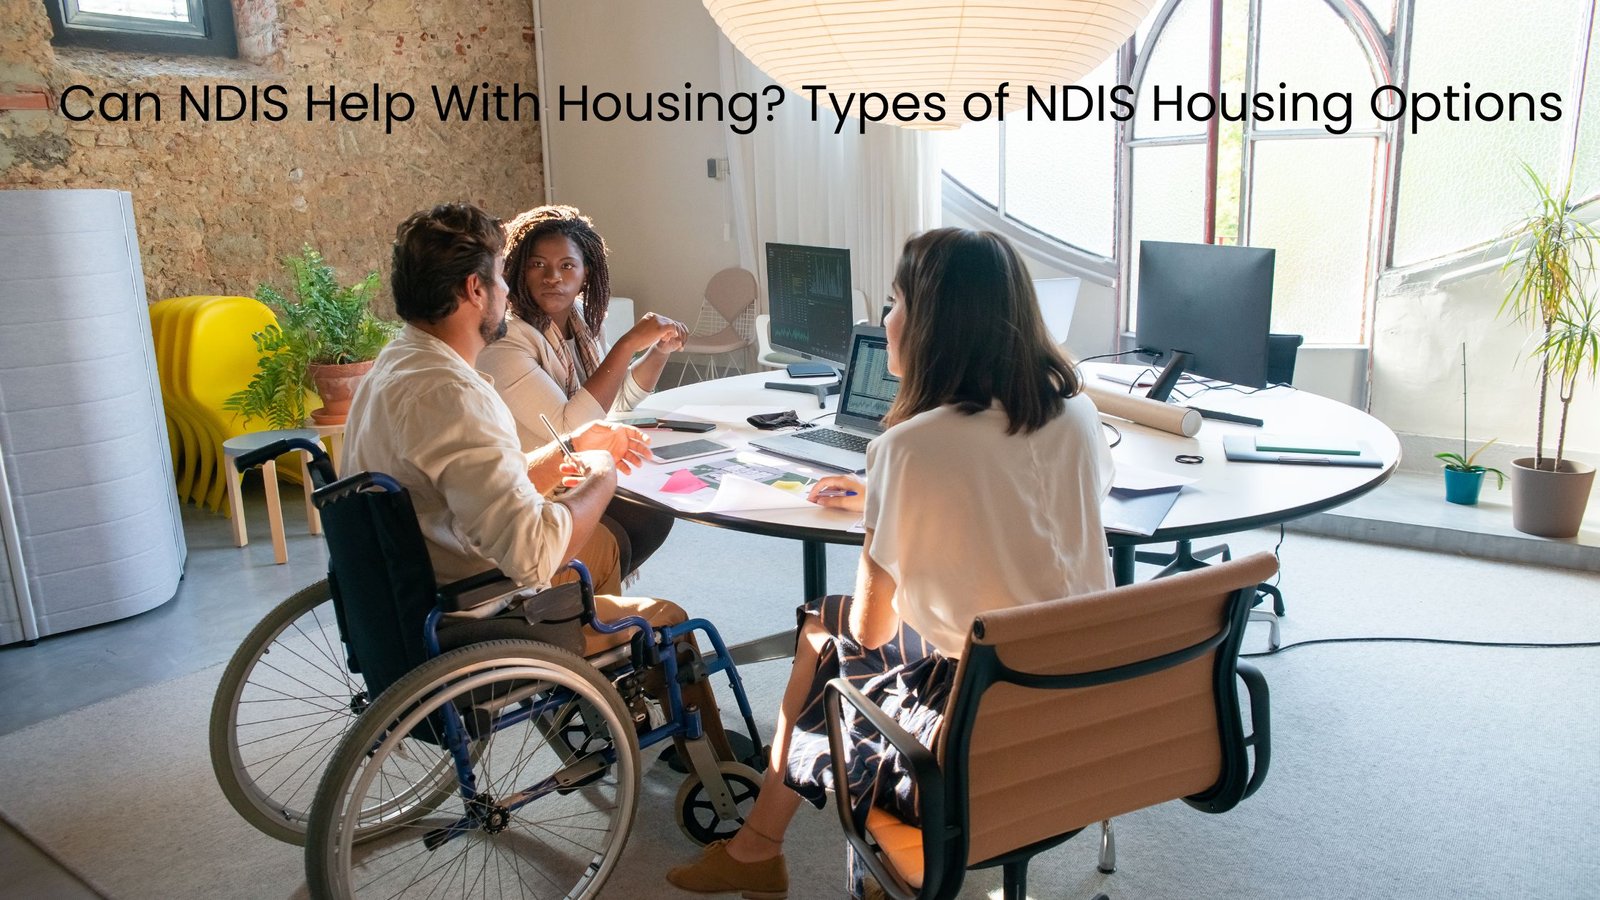 Can NDIS Help With Housing? Types of NDIS Housing Options